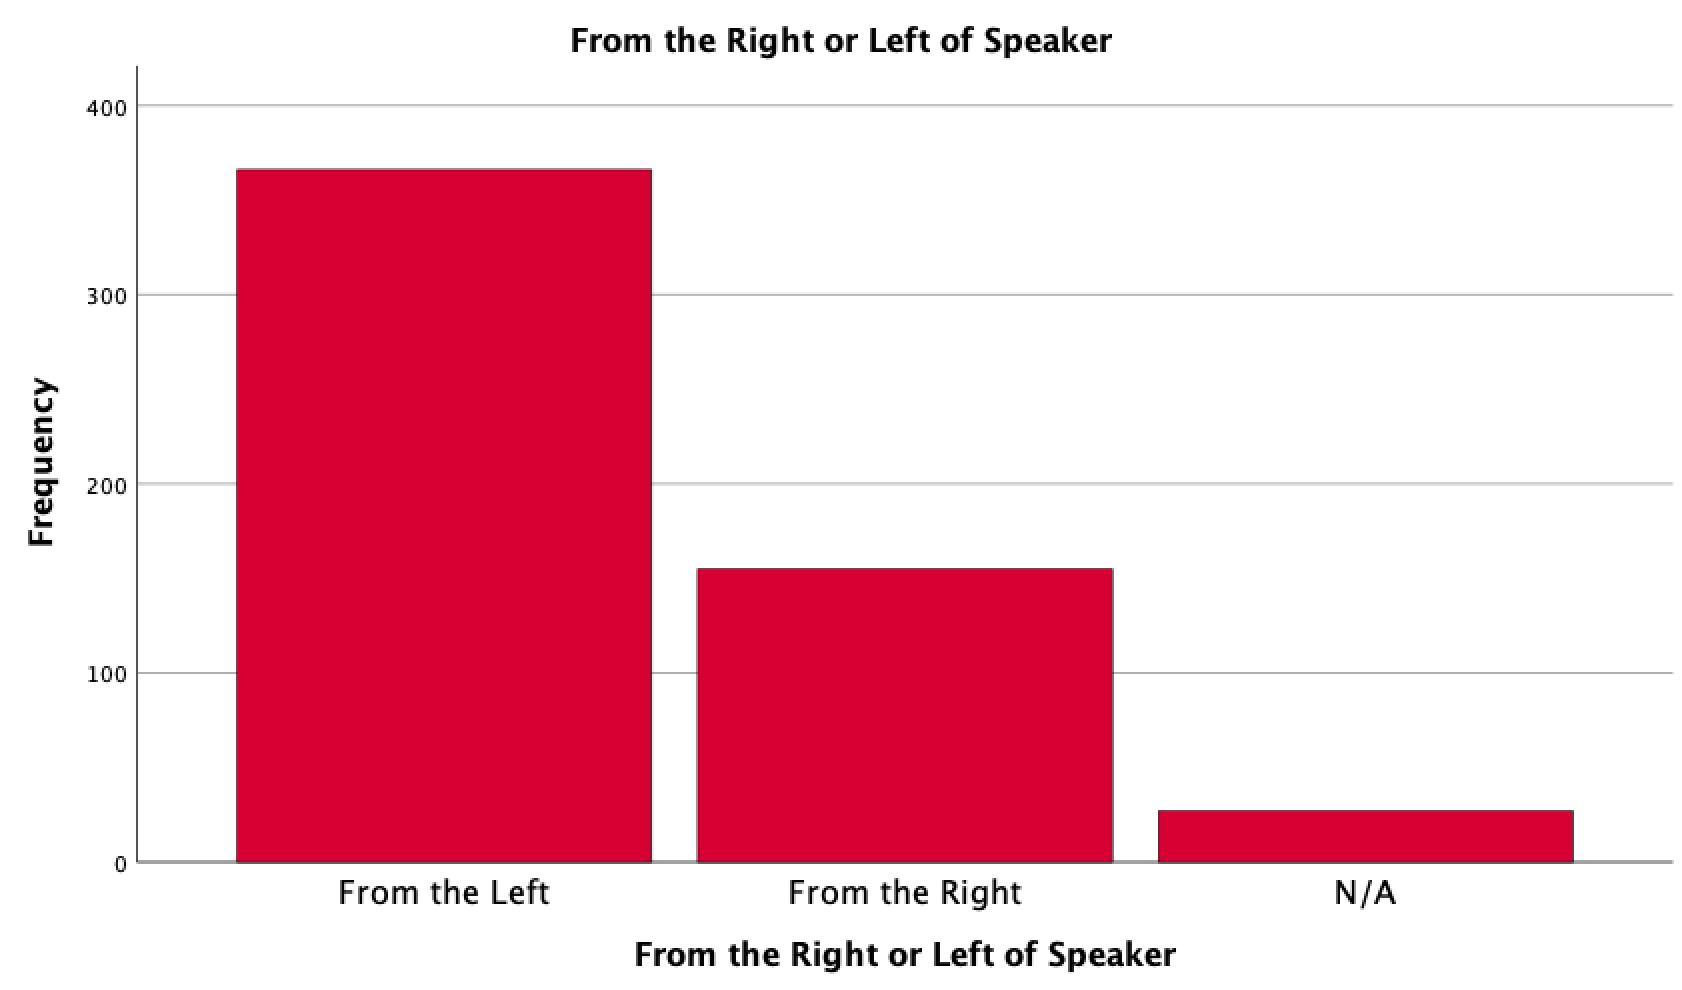 The graph shows the number of disinvitation attempts from students on the left and the right.